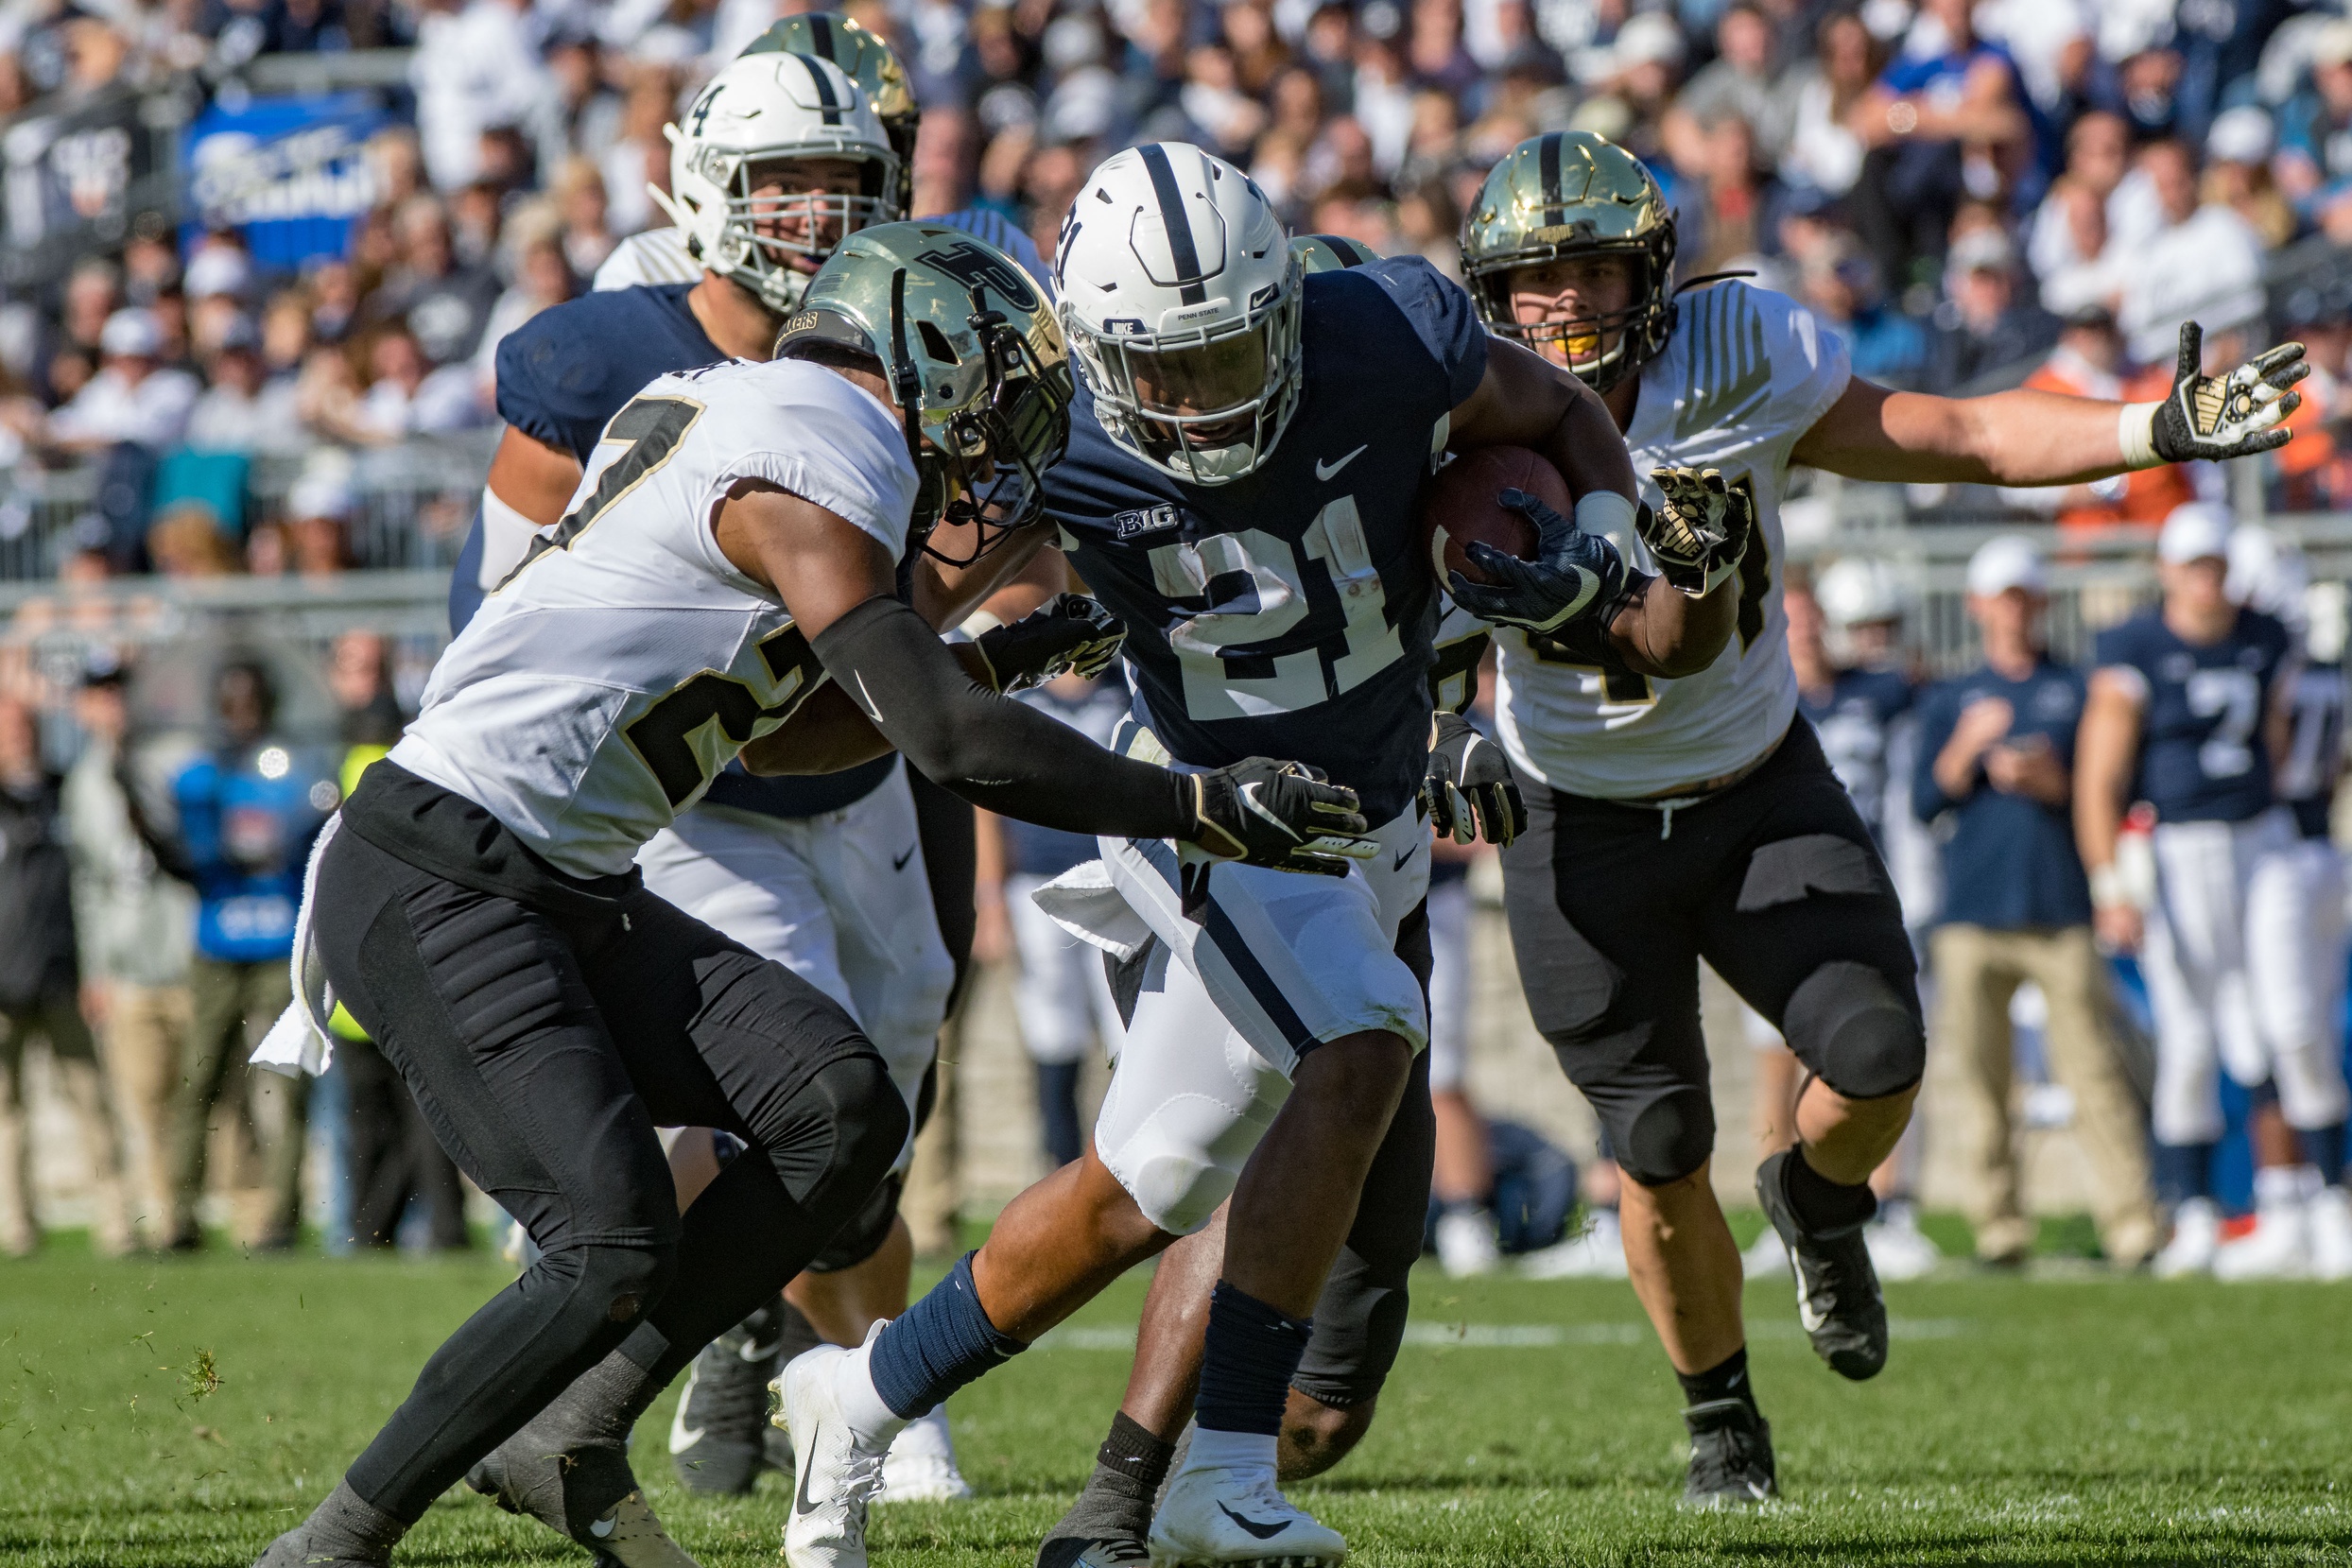 Podcast: Recapping Penn State's win over Purdue